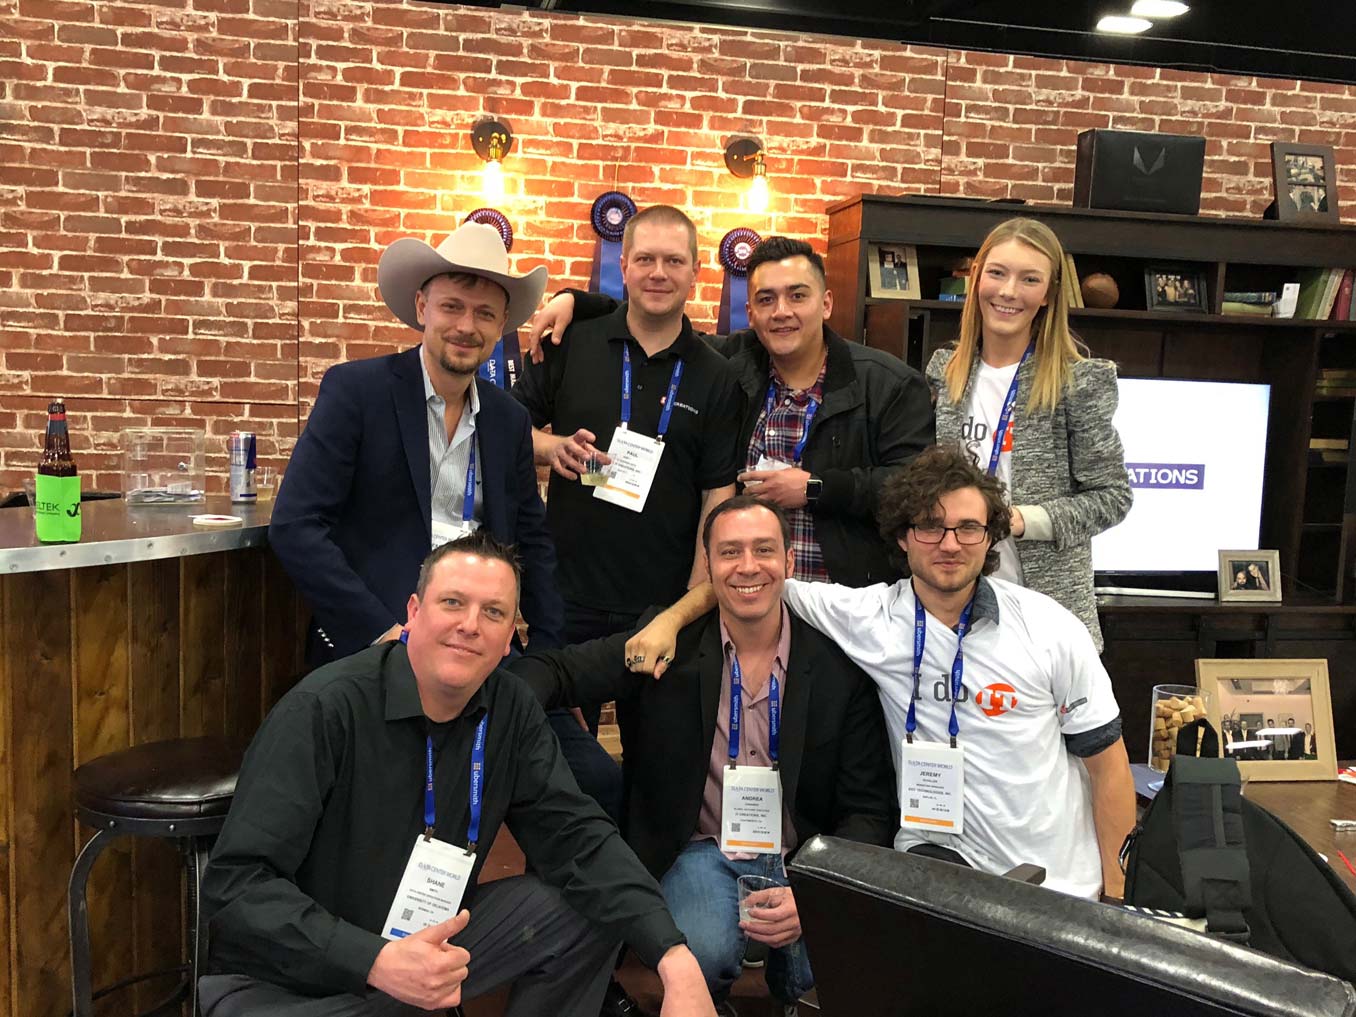 Group picture at Data Center World 2018